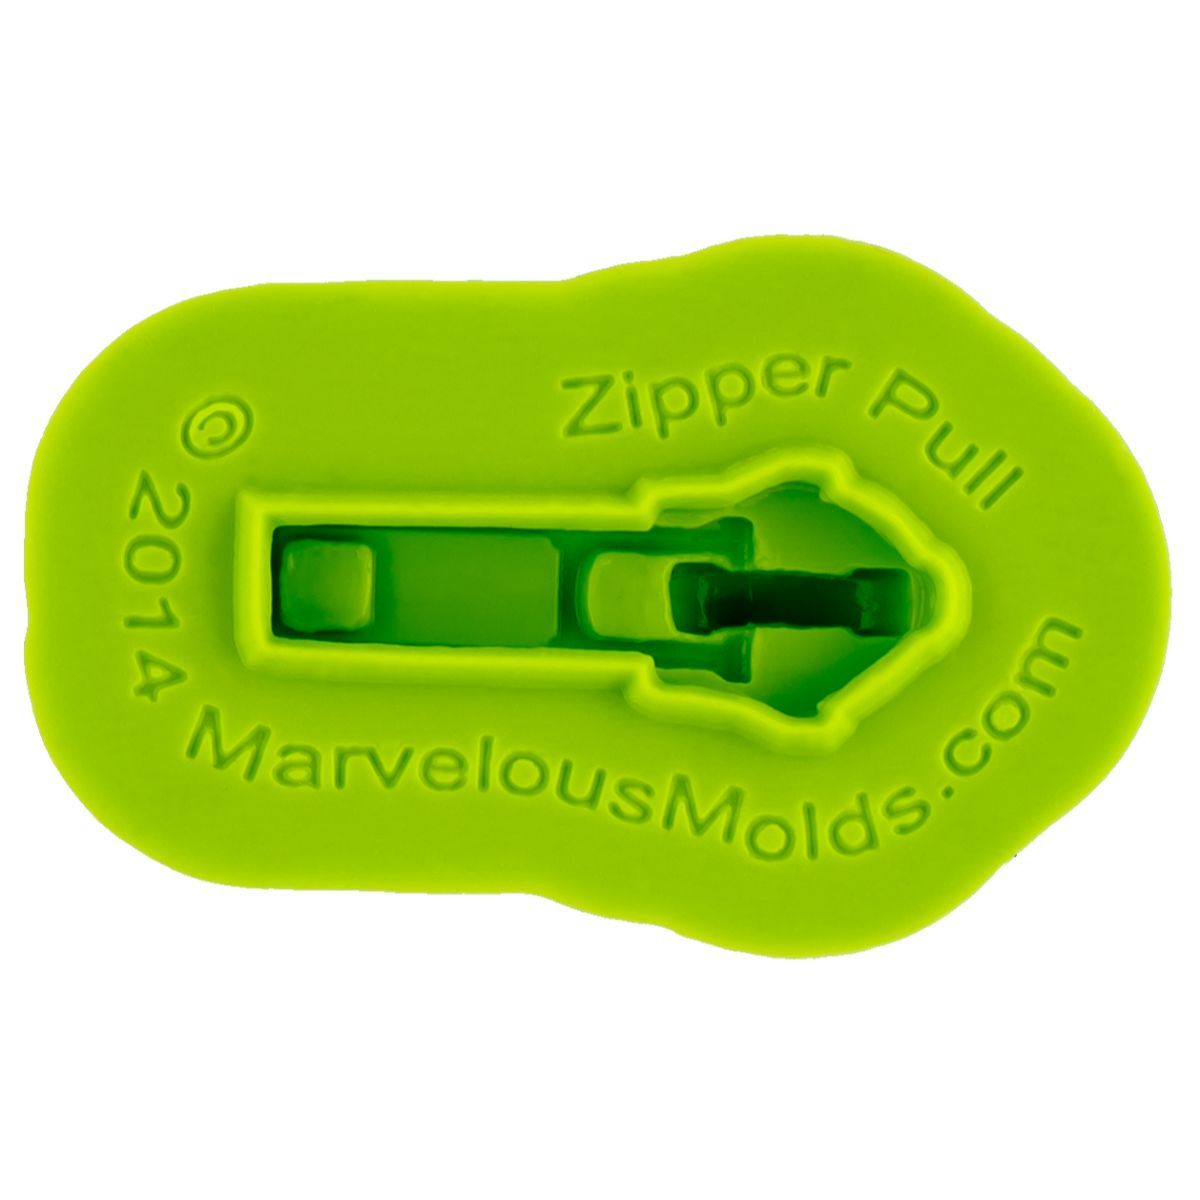 Marvelous Molds Small Chain Mold